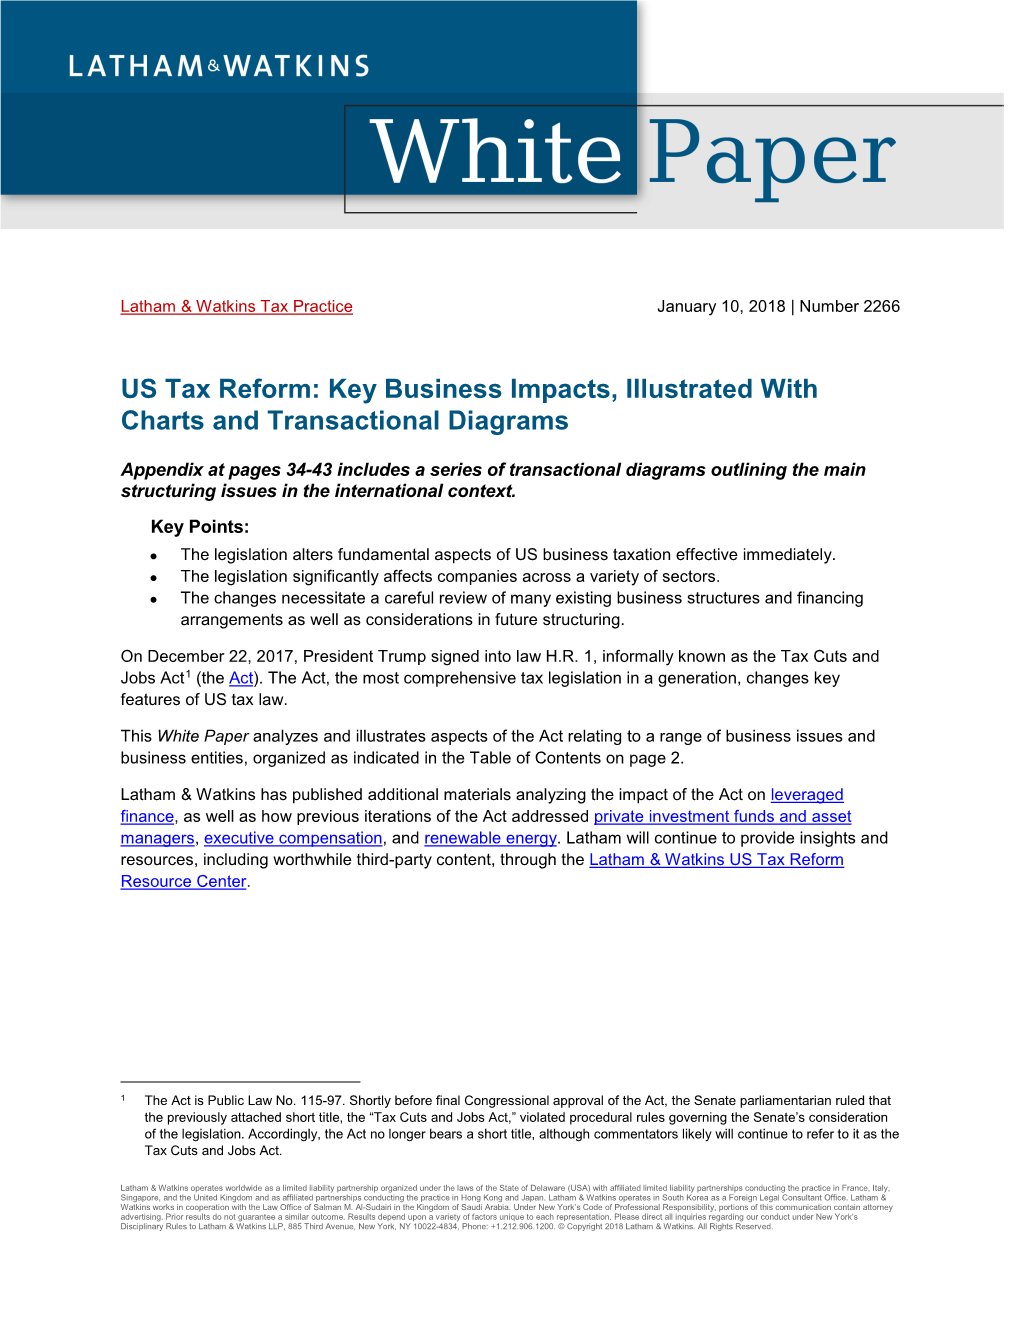 US Tax Reform: Key Business Impacts, Illustrated with Charts and Transactional Diagrams